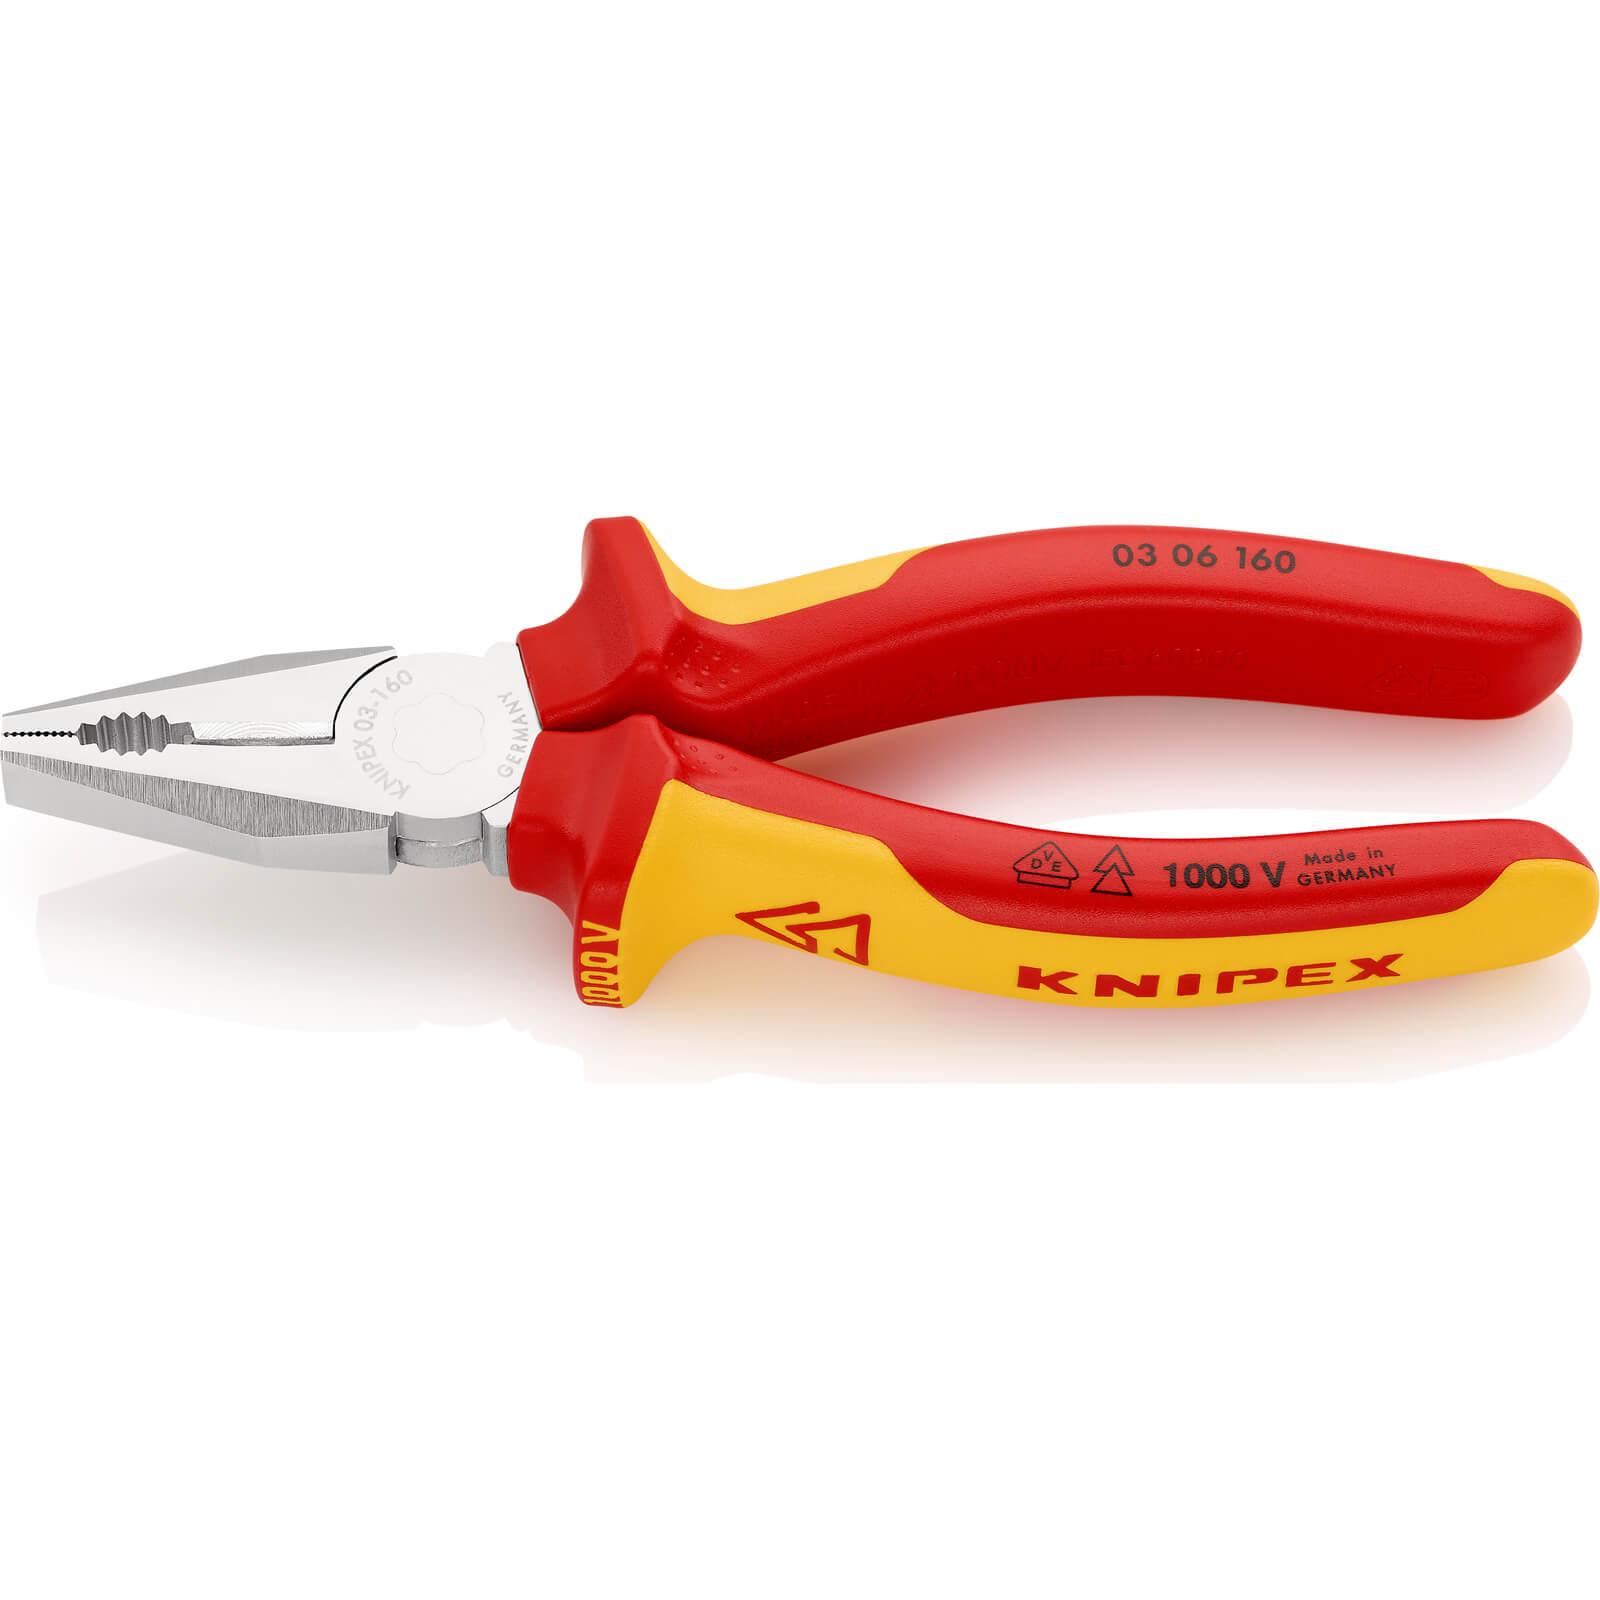 Photo of Knipex 03 06 Vde Insulated Combination Pliers 160mm